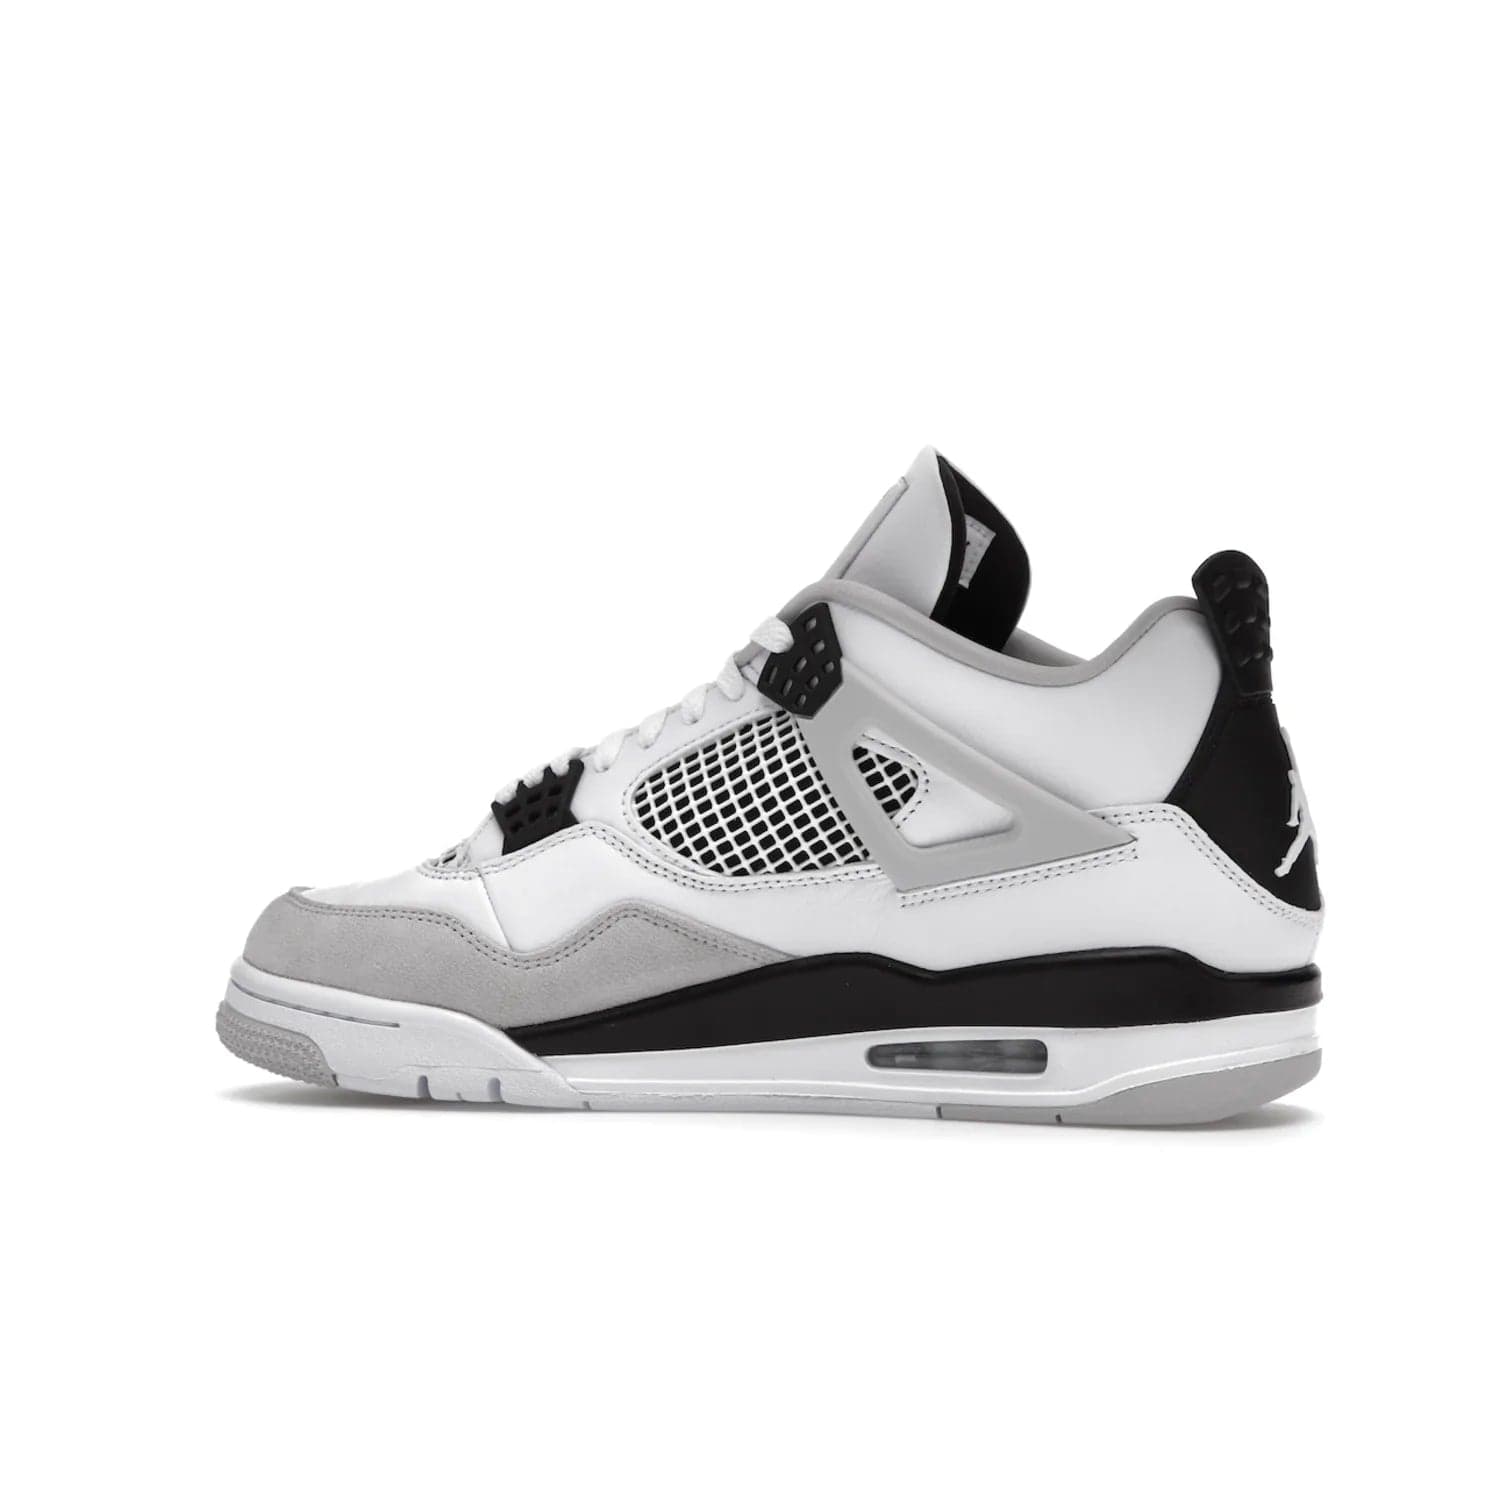 Jordan 4 Retro Military Black - Image 21 - Only at www.BallersClubKickz.com - Updated Air Jordan 4 style with a white/black/light grey sole and visible Air unit. Released in May 2022, offering timeless classic style and comfort.